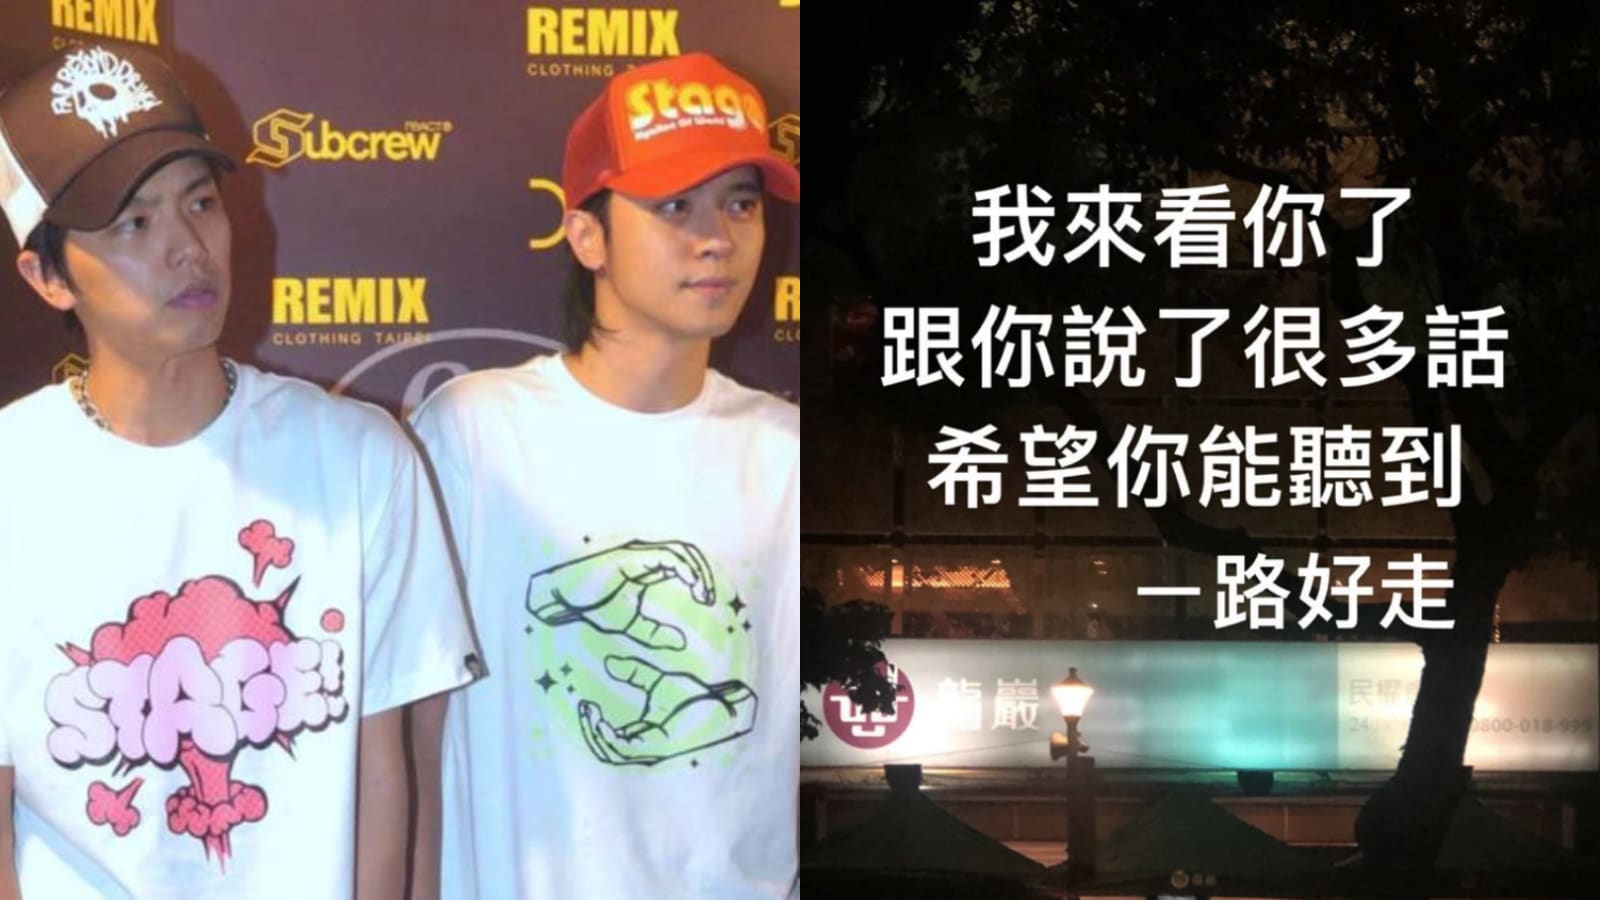 Show Luo Pays Low-Key Visit To Alien Huang’s Wake; Posts About Having “A Lot To Say” To Him